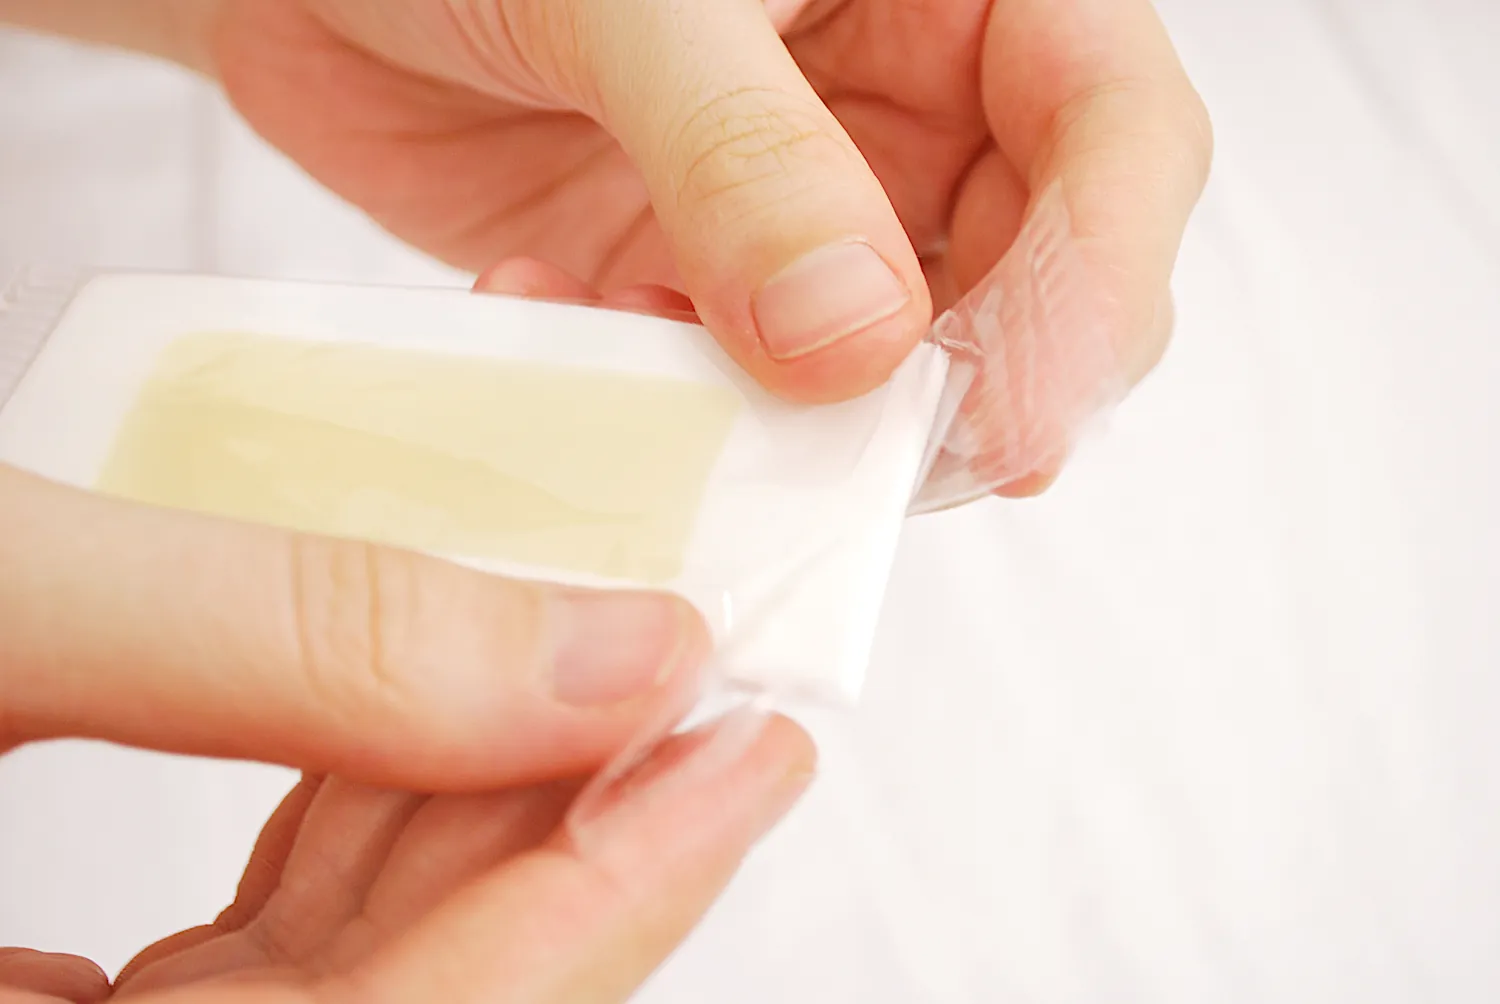 how to use facial wax strips